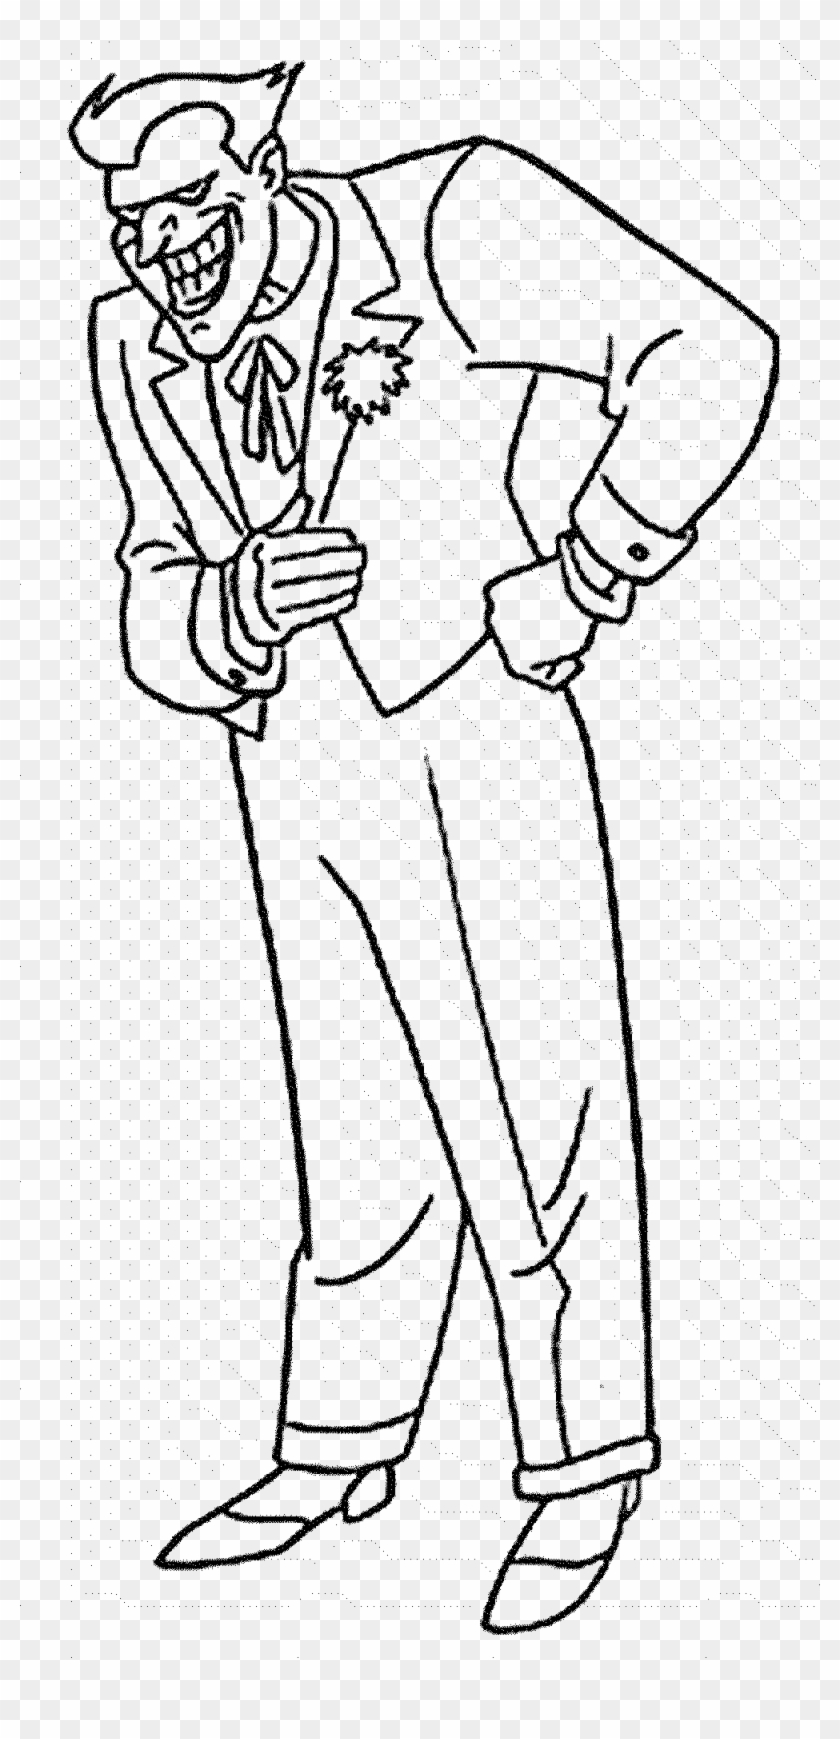 Inspiration Batman And Joker Coloring Pages - Batman The Animated Series Joker Outline Clipart #6056265